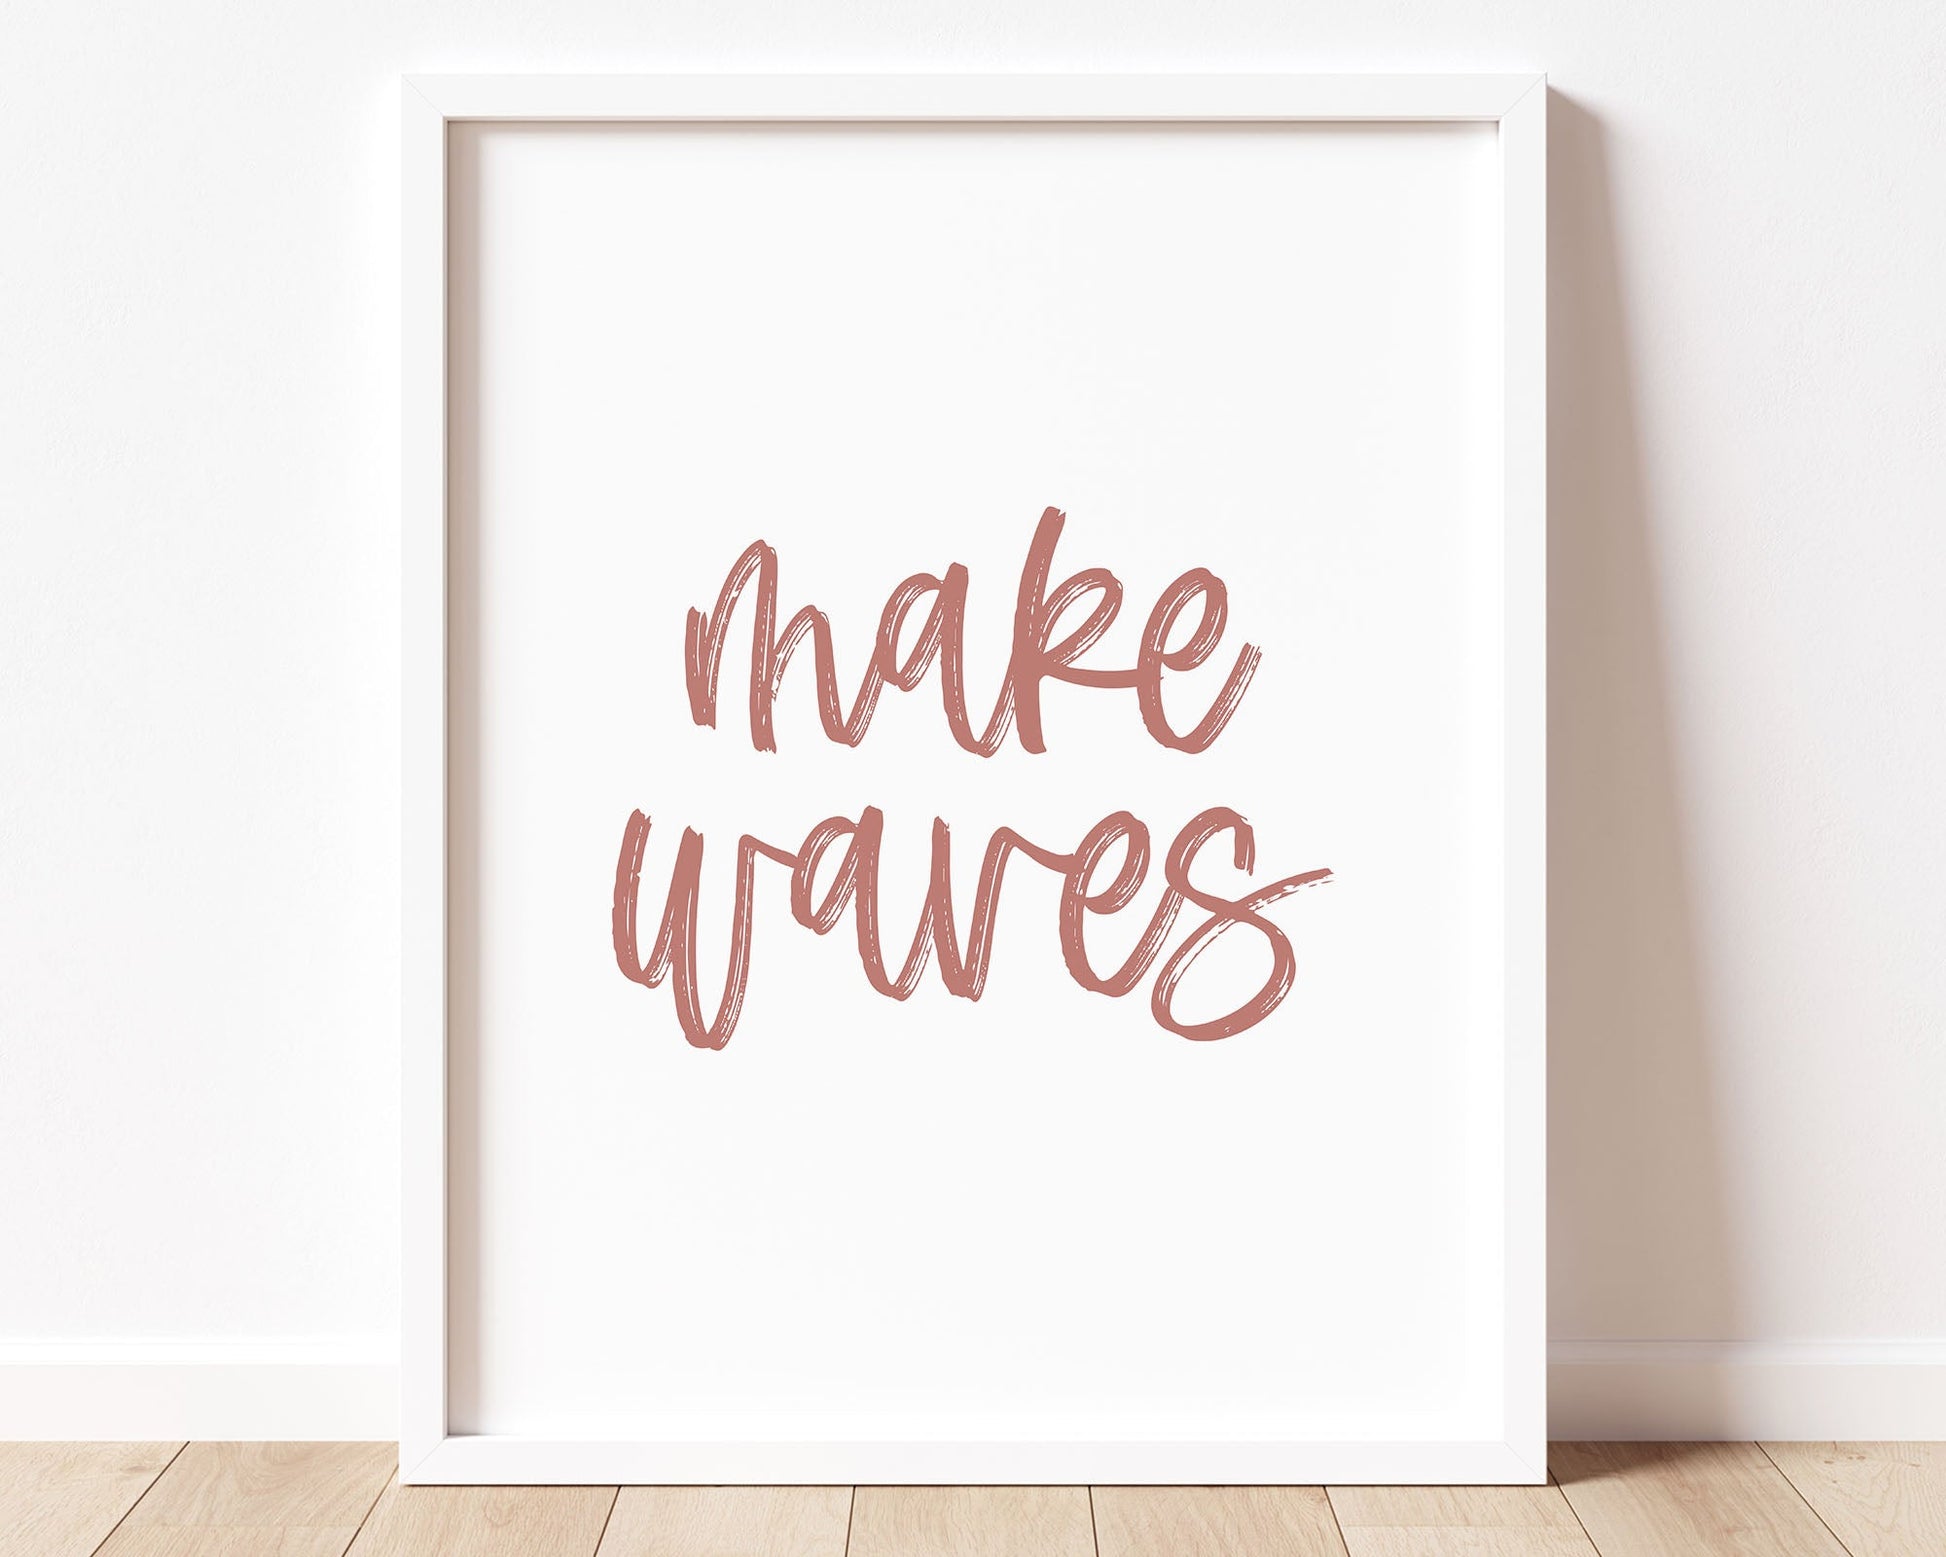 Dusty Rose Make Waves Printable Wall Art featuring a textured brush style cursive lettered quote.